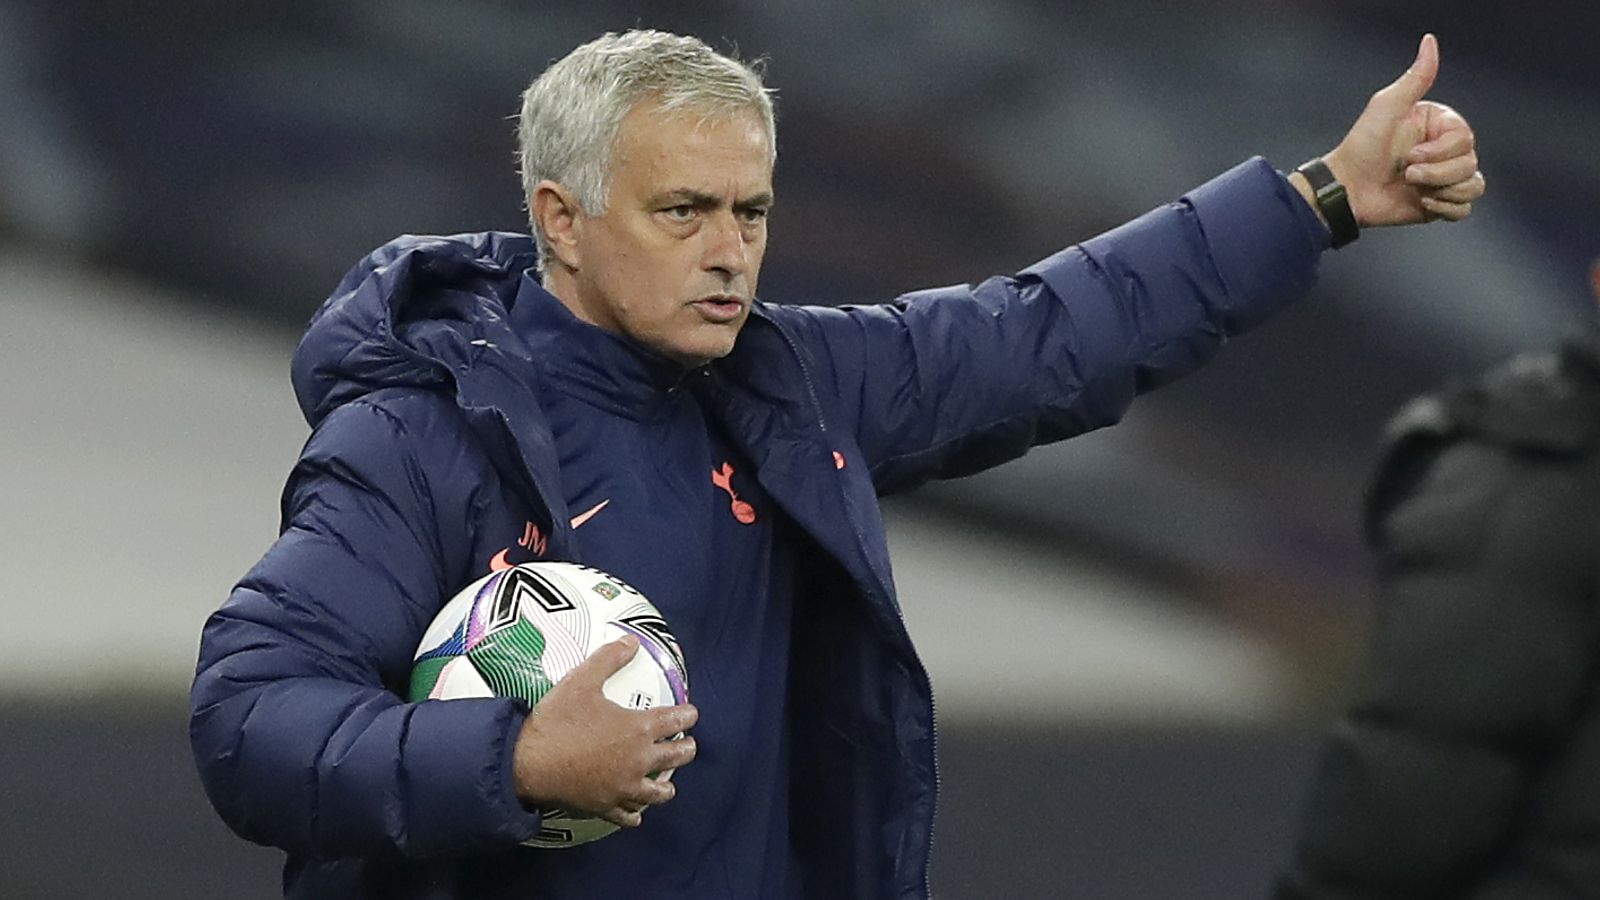 jose-mourinho-hails-tottenham-as-magnificent-after-carabao-cup-shootout-win-against-chelsea